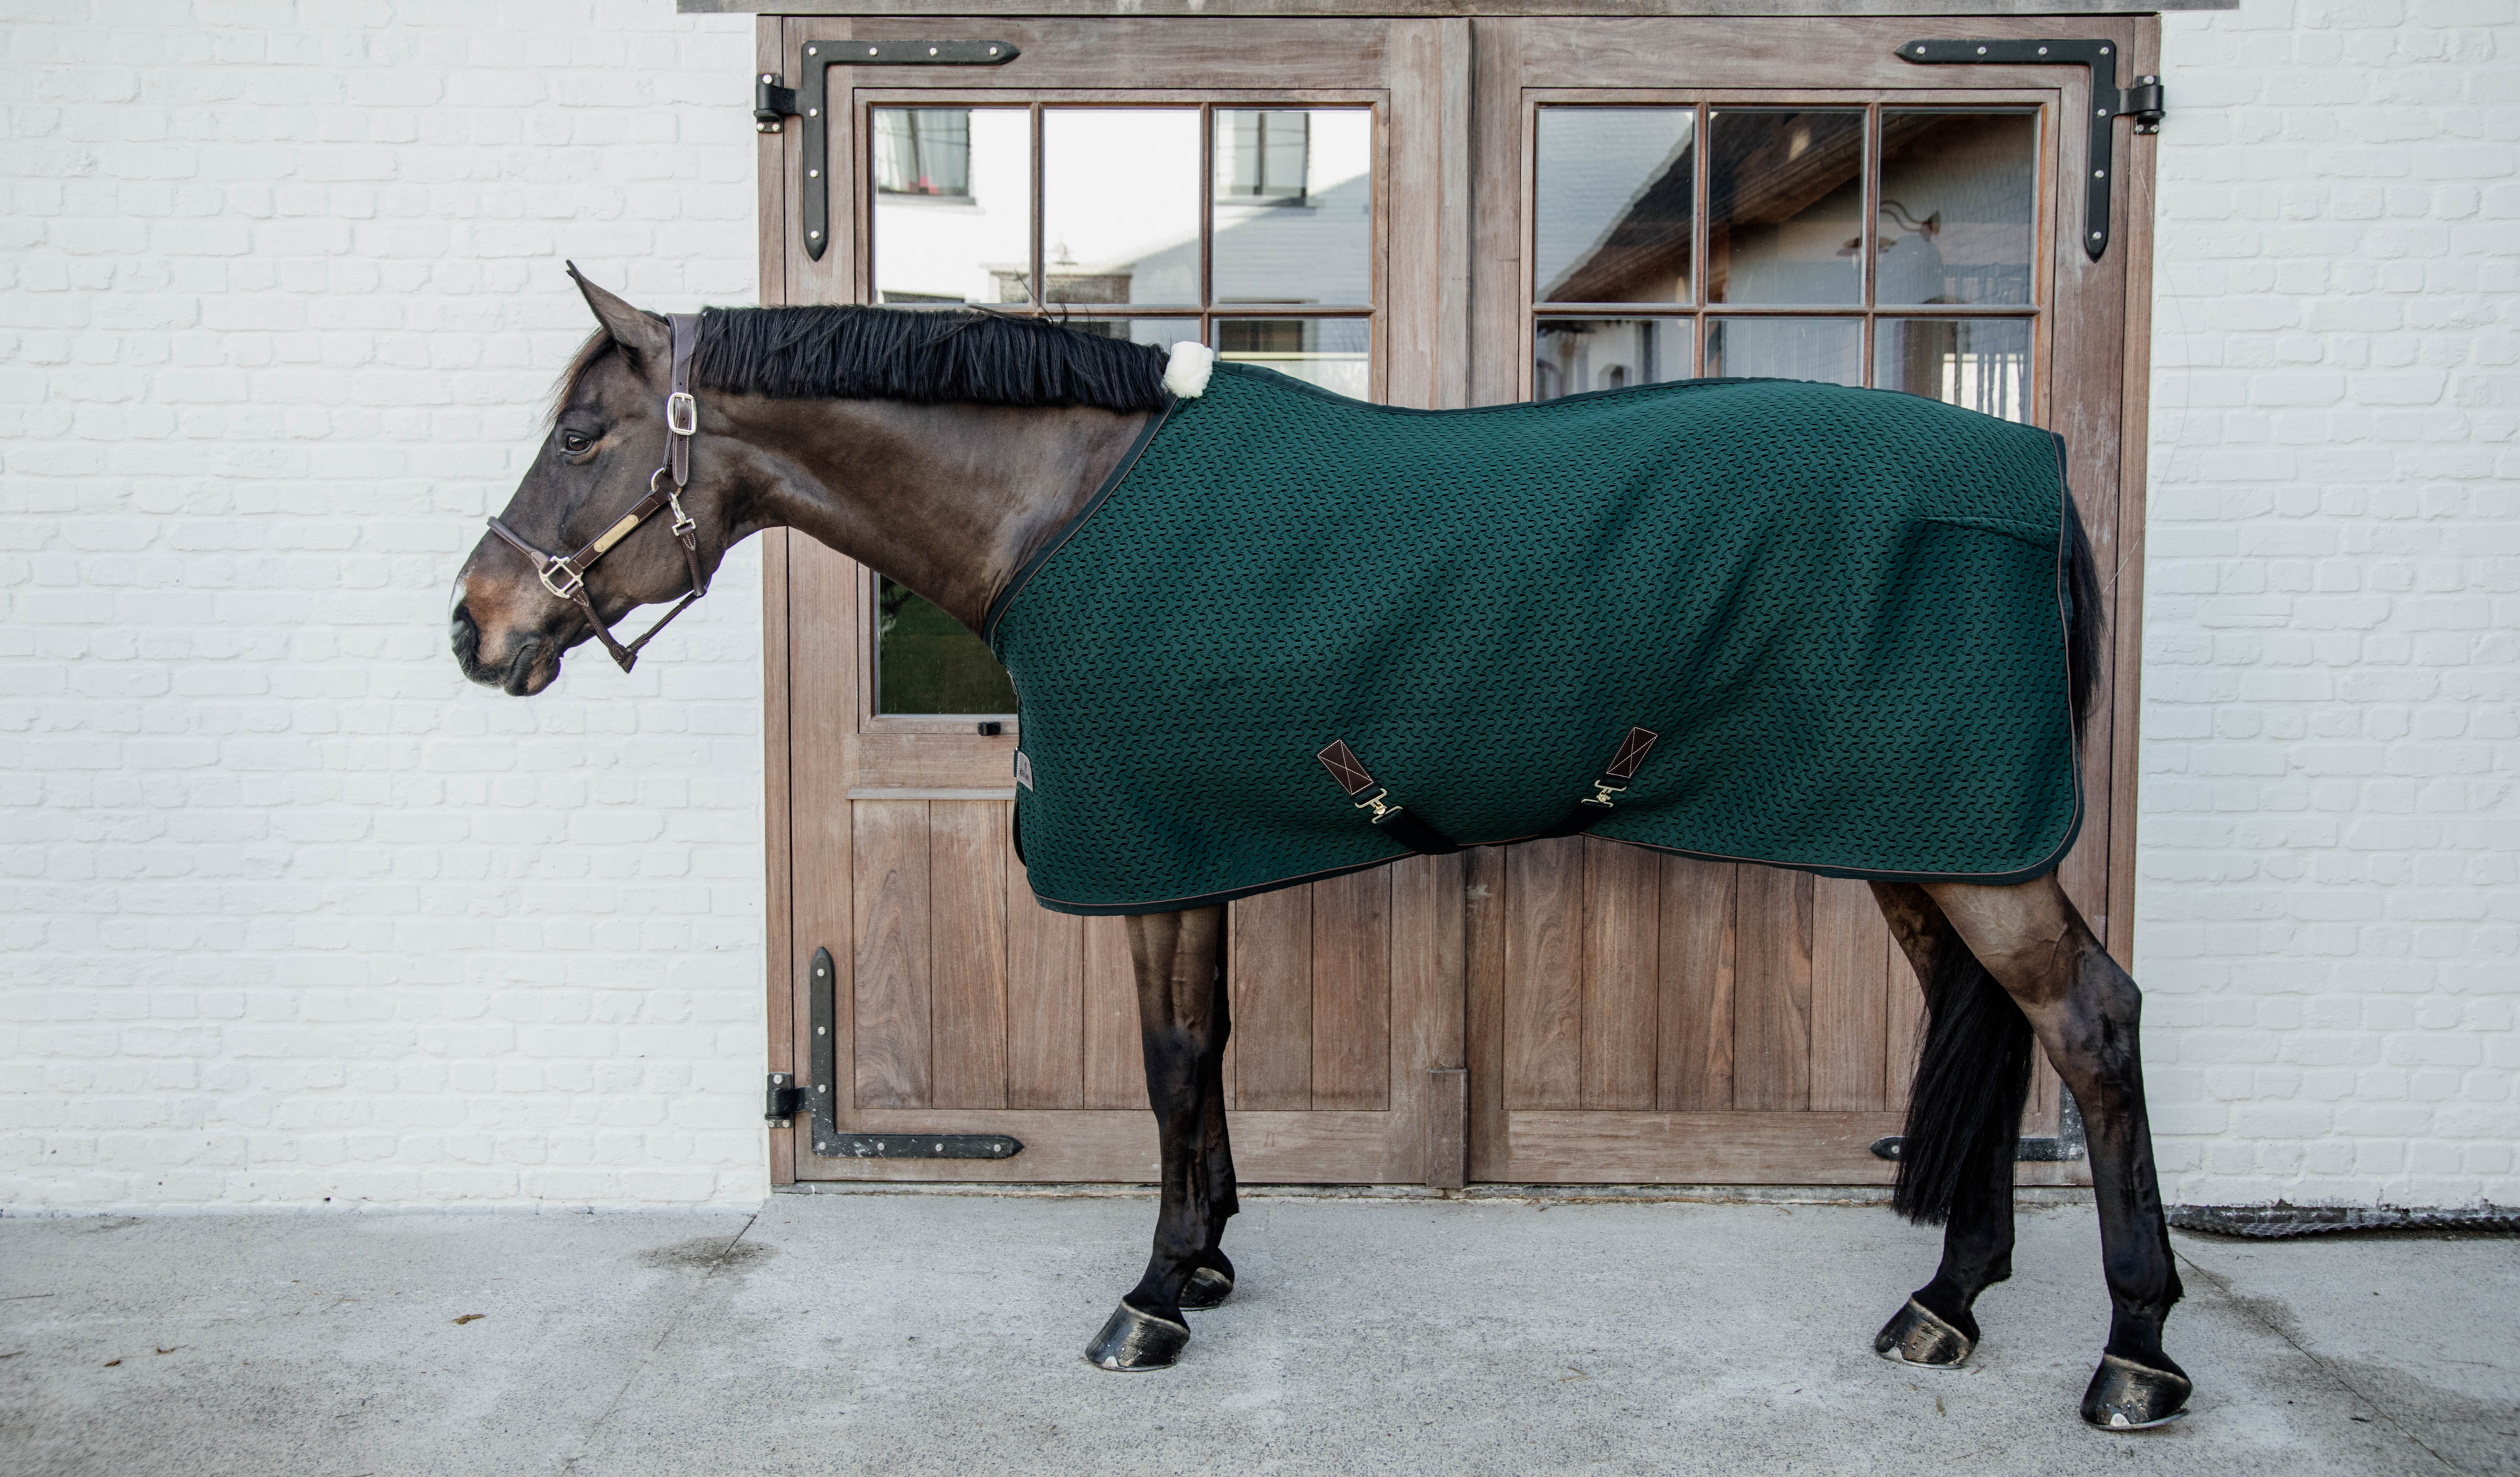 Kentucky NEW 4D Spacer Cooler Rug available for PREORDER